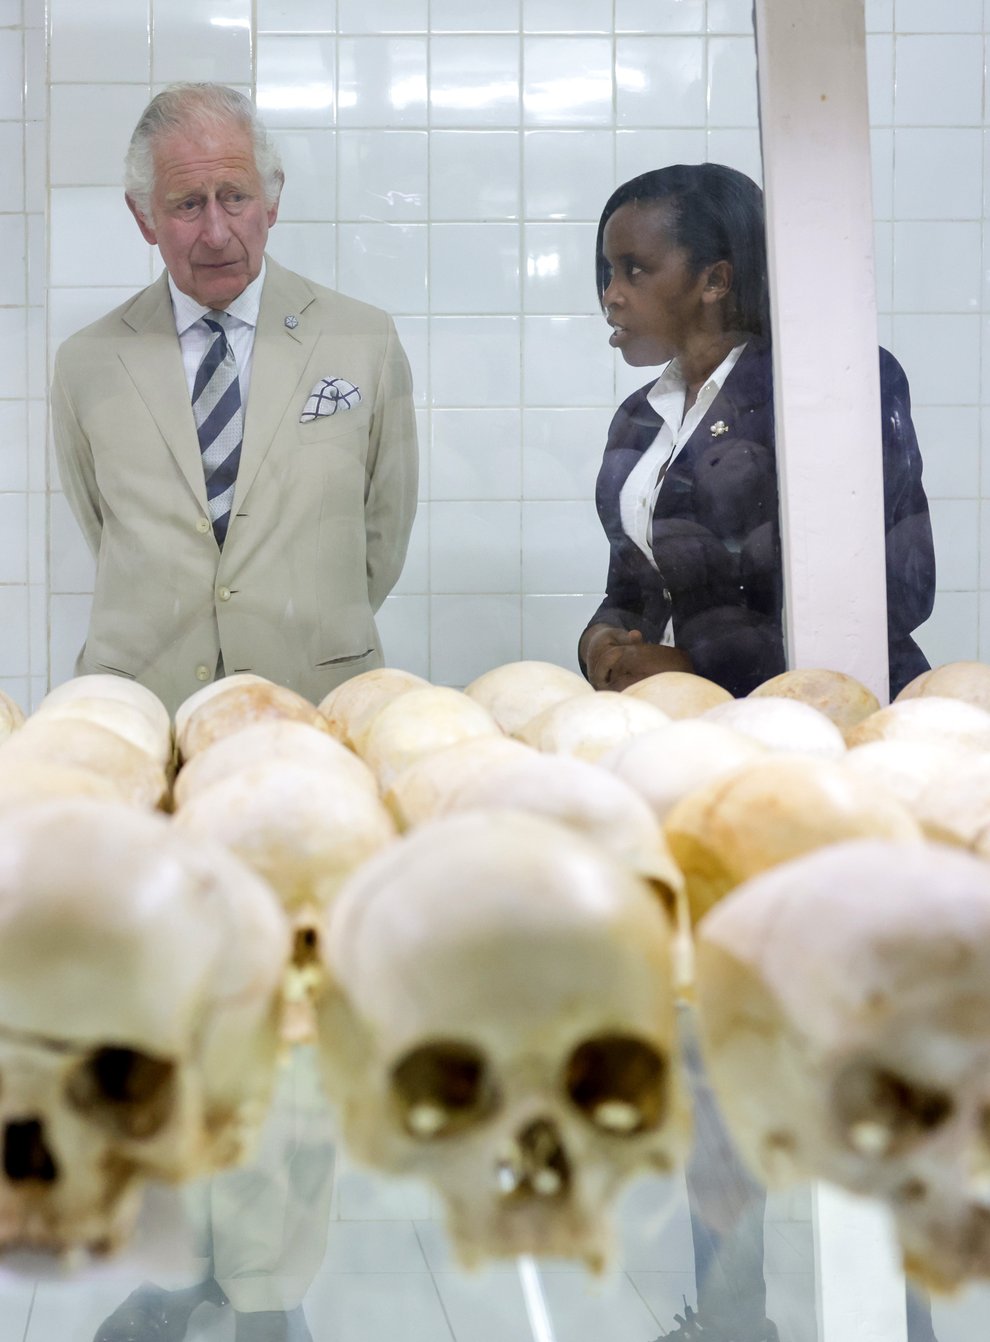 Manager Rachel Murekatete shows the Prince of Wales skulls of victims during his visit to the Nyamata Church Genocide Memorial, as part of his visit to Rwanda (Chris Jackson/PA)